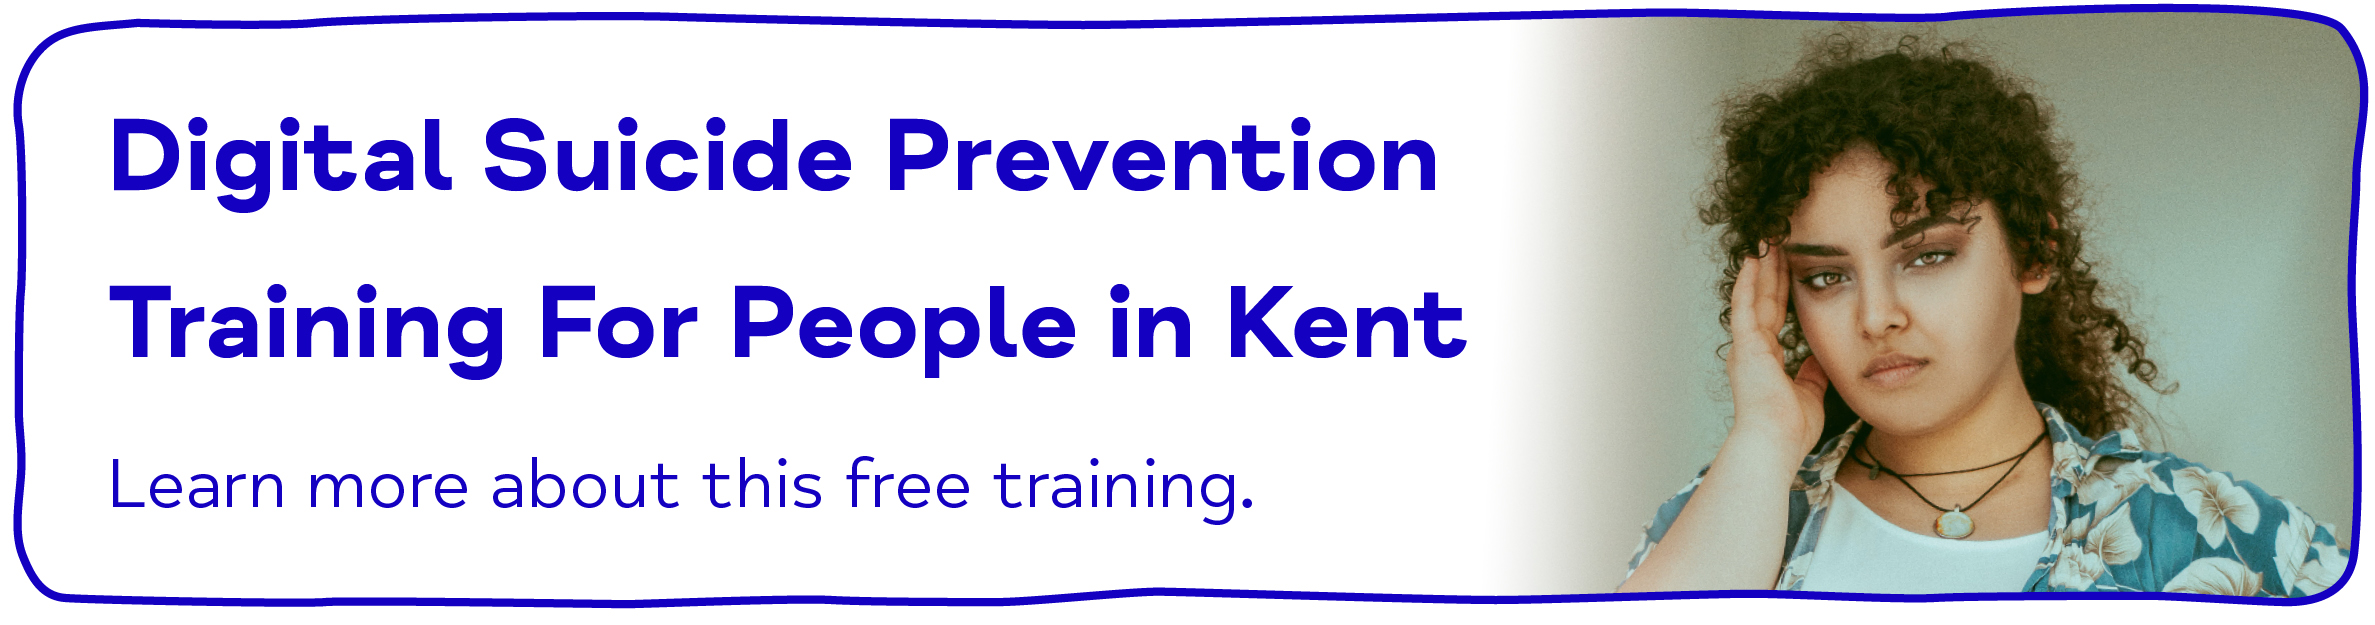 Digital Suicide Prevention Training For People in Kent. Learn more about this free training.